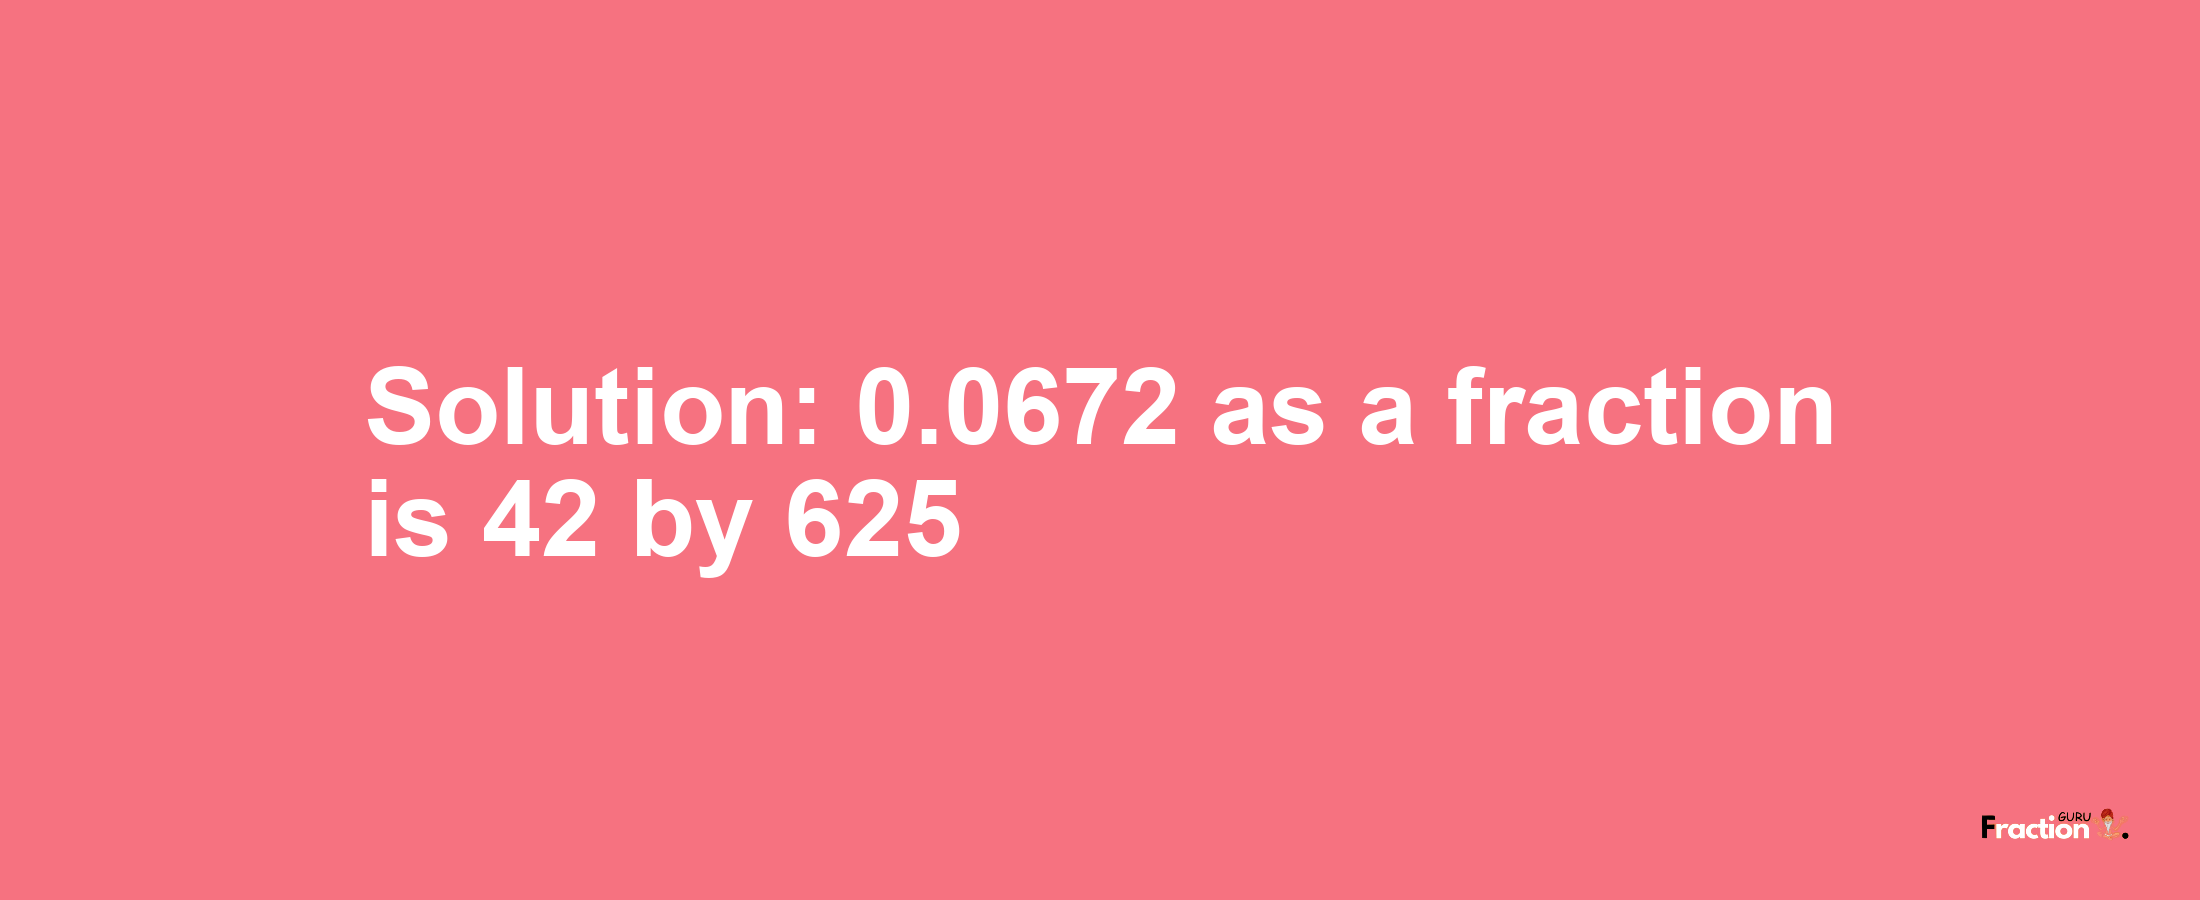 Solution:0.0672 as a fraction is 42/625